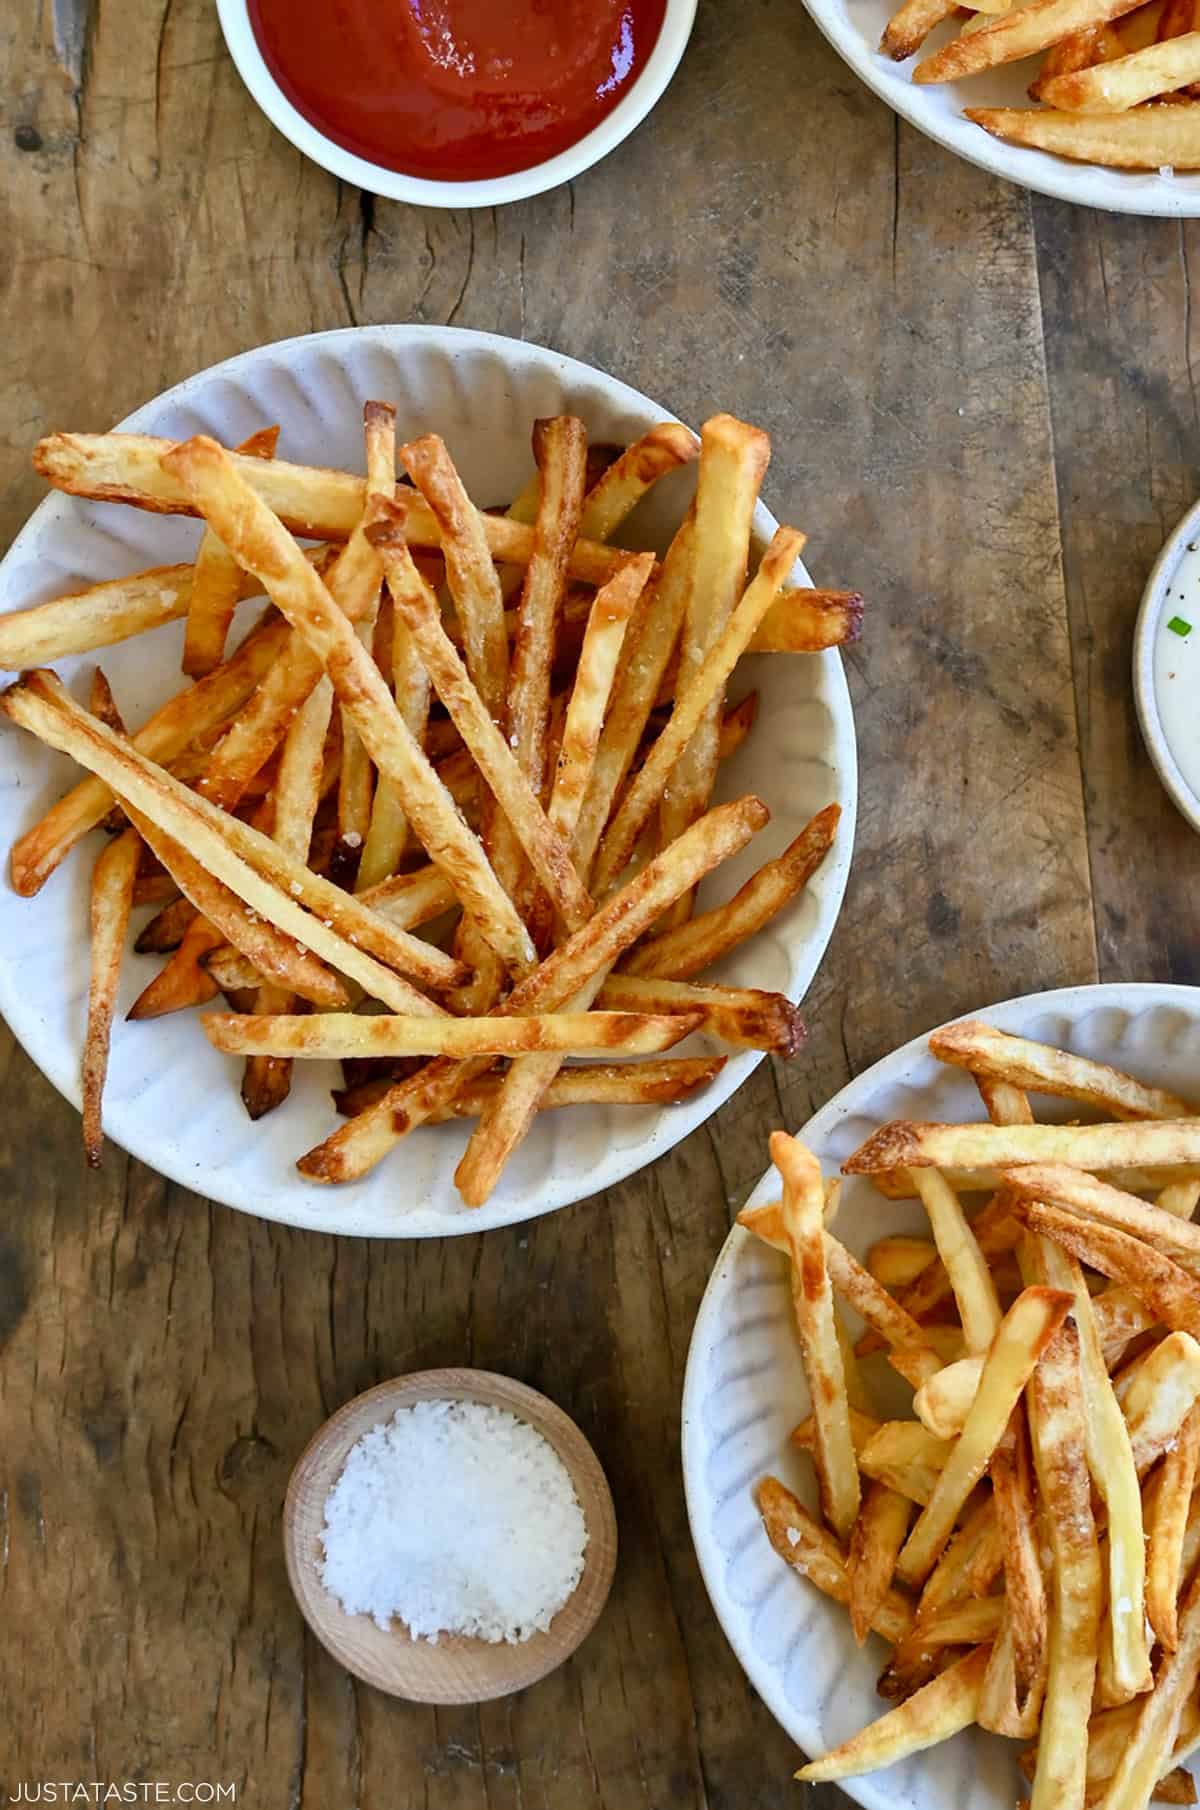 Crispy French fries in two bowls next to a bowl with ketchup, a bowl with sea salt and a bowl with ranch dressing.